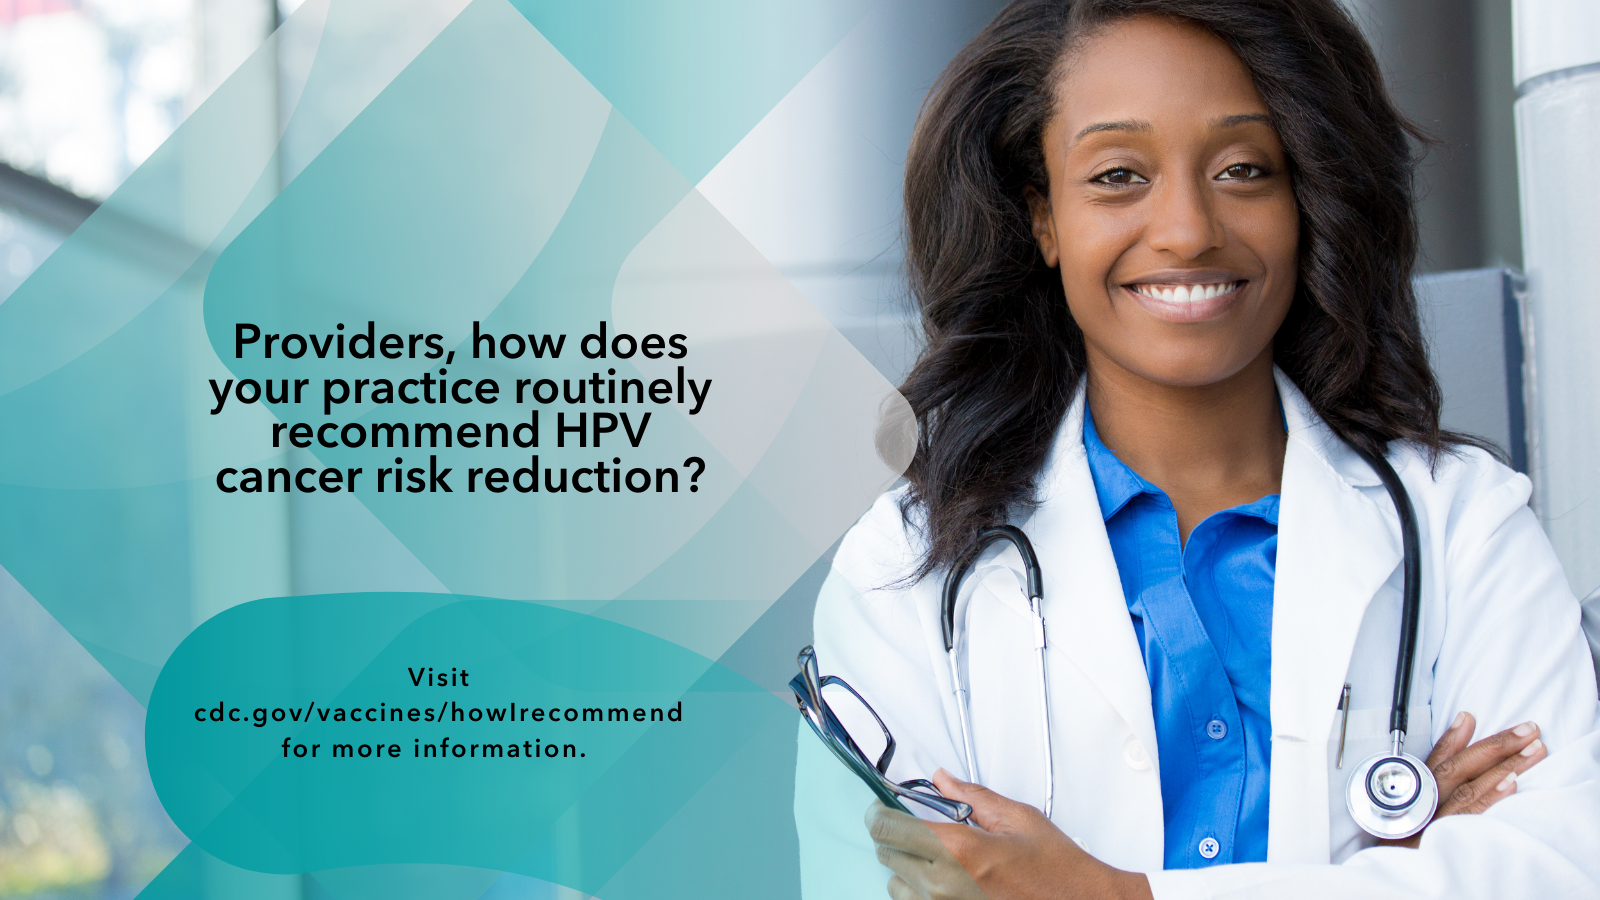 Image of Black female doctor. Overlay text reads: Providers, how does your practice routinely recommend HPV cancer risk reduction?